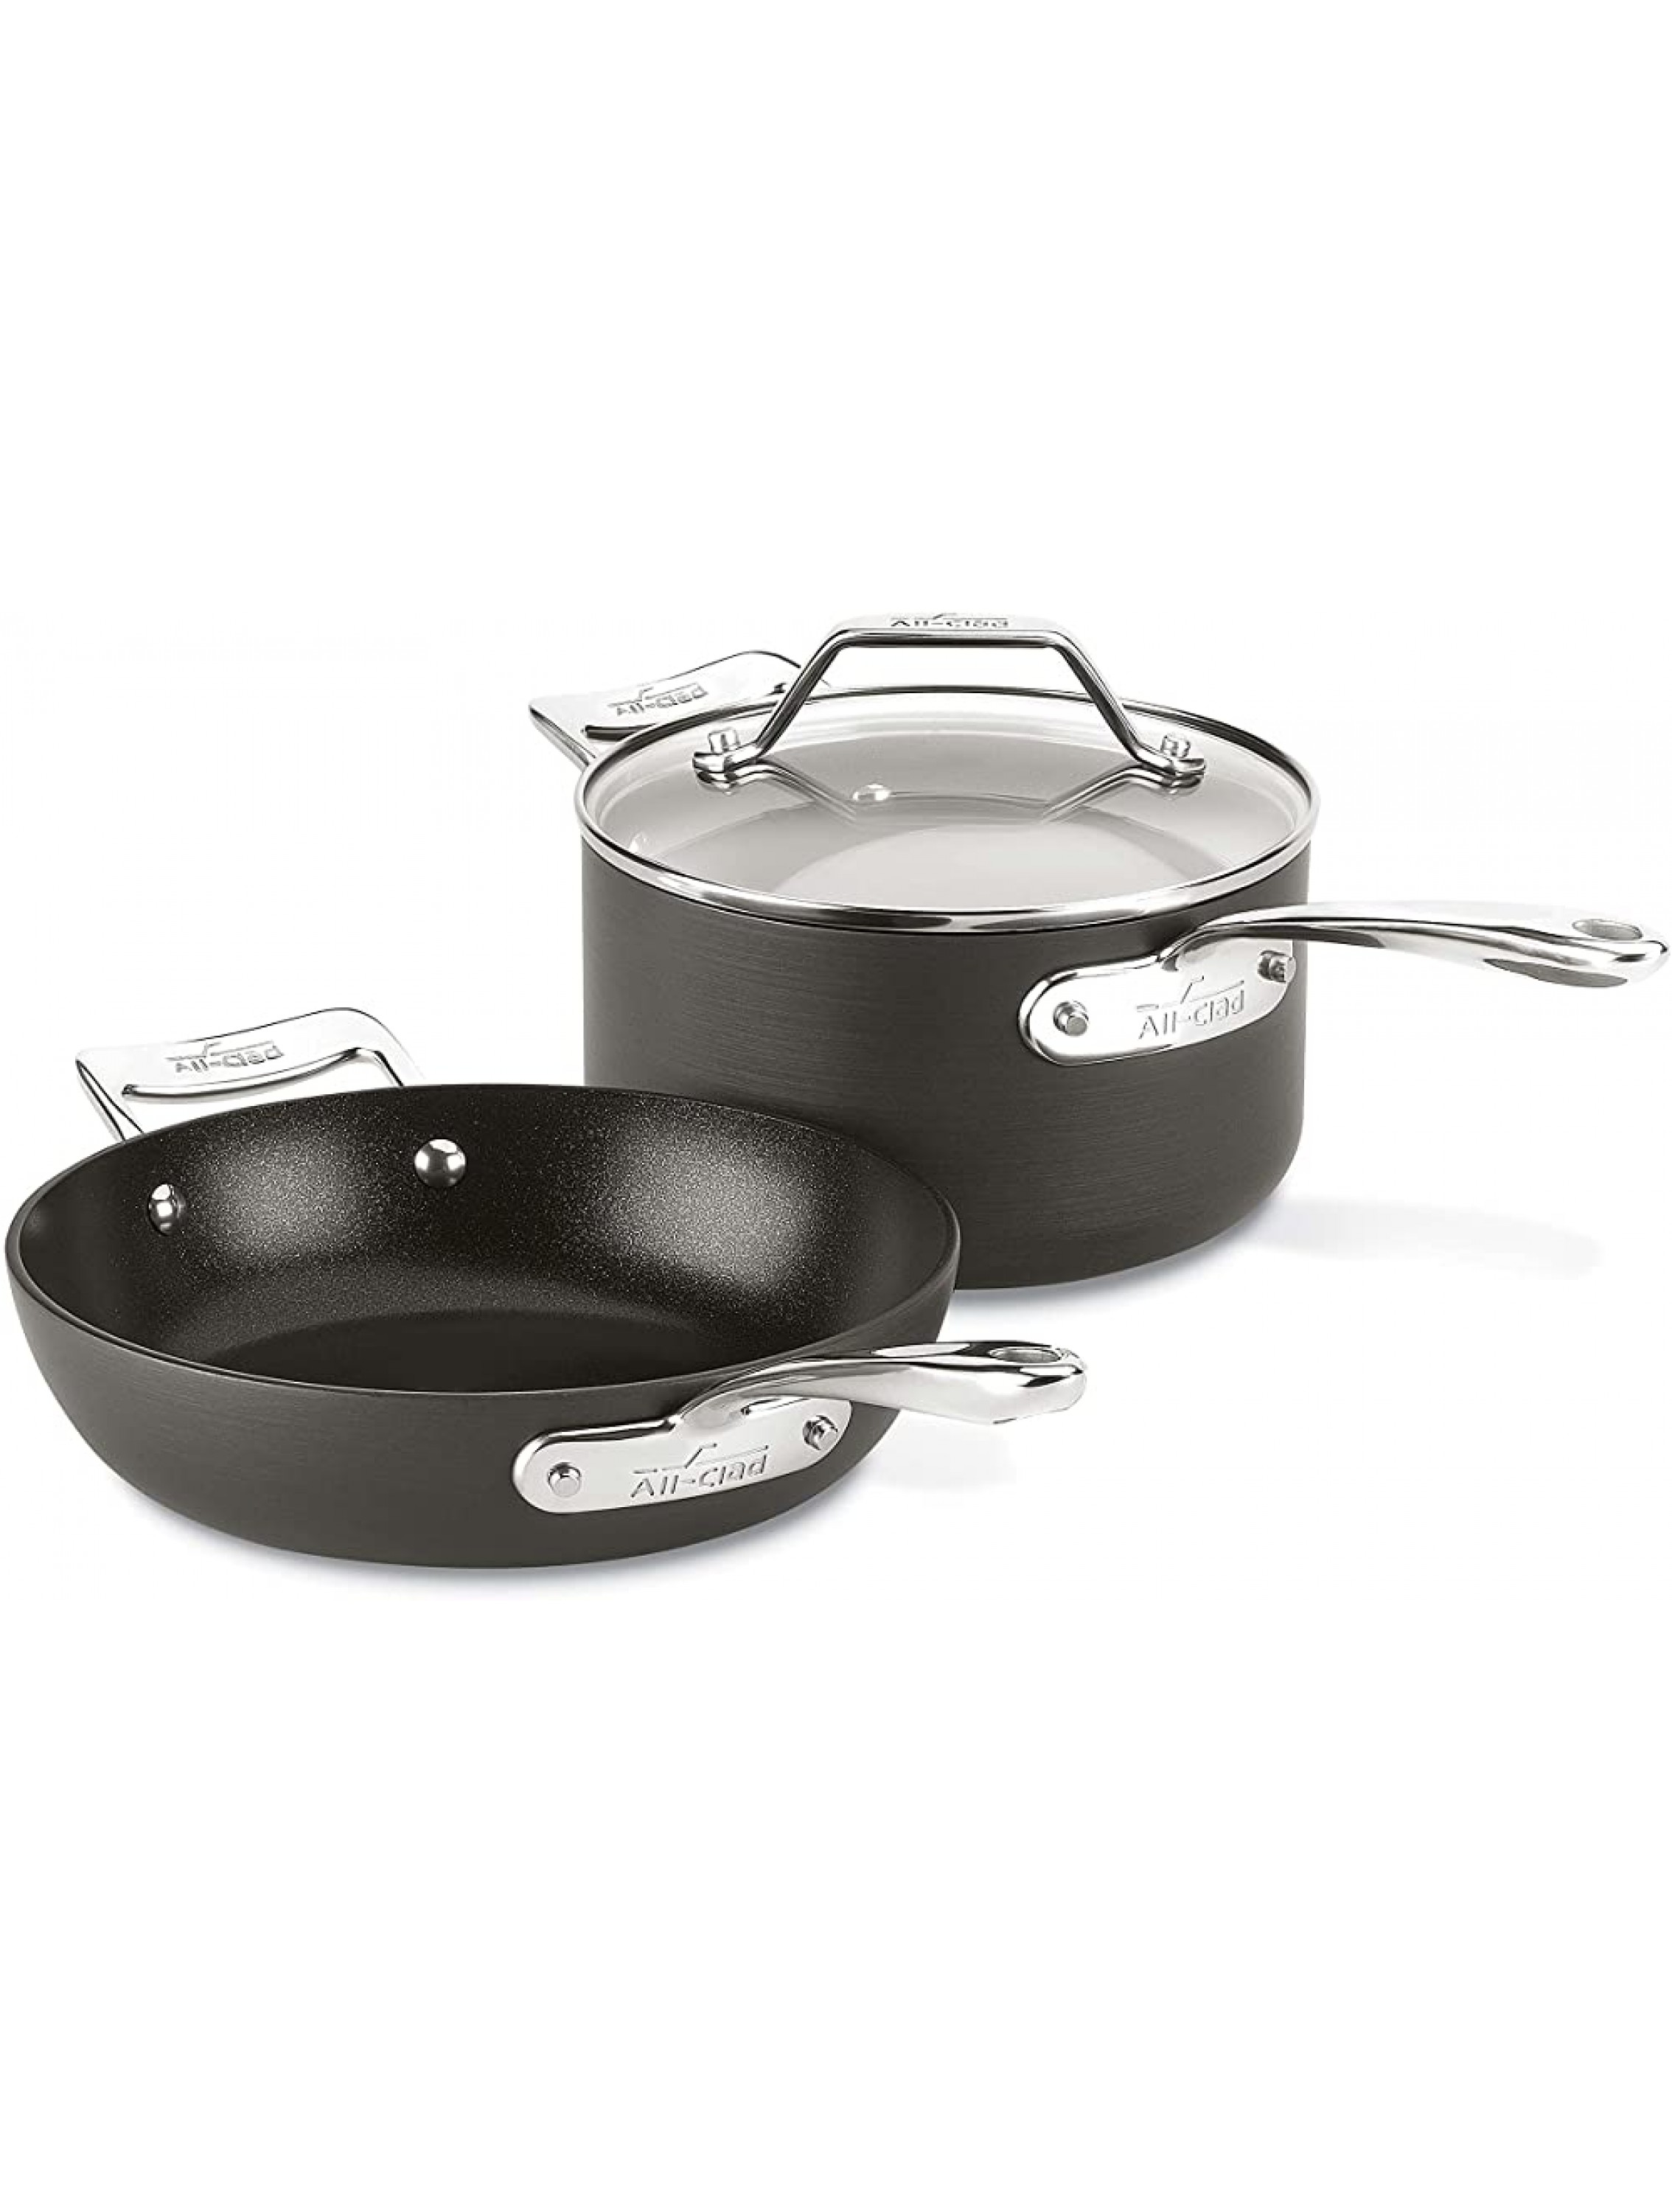 All-Clad Essentials Nonstick Fry Sauce pan 8.5-Inch 2.5-Quart Grey,H911S364,Gray - BWCFEE94E